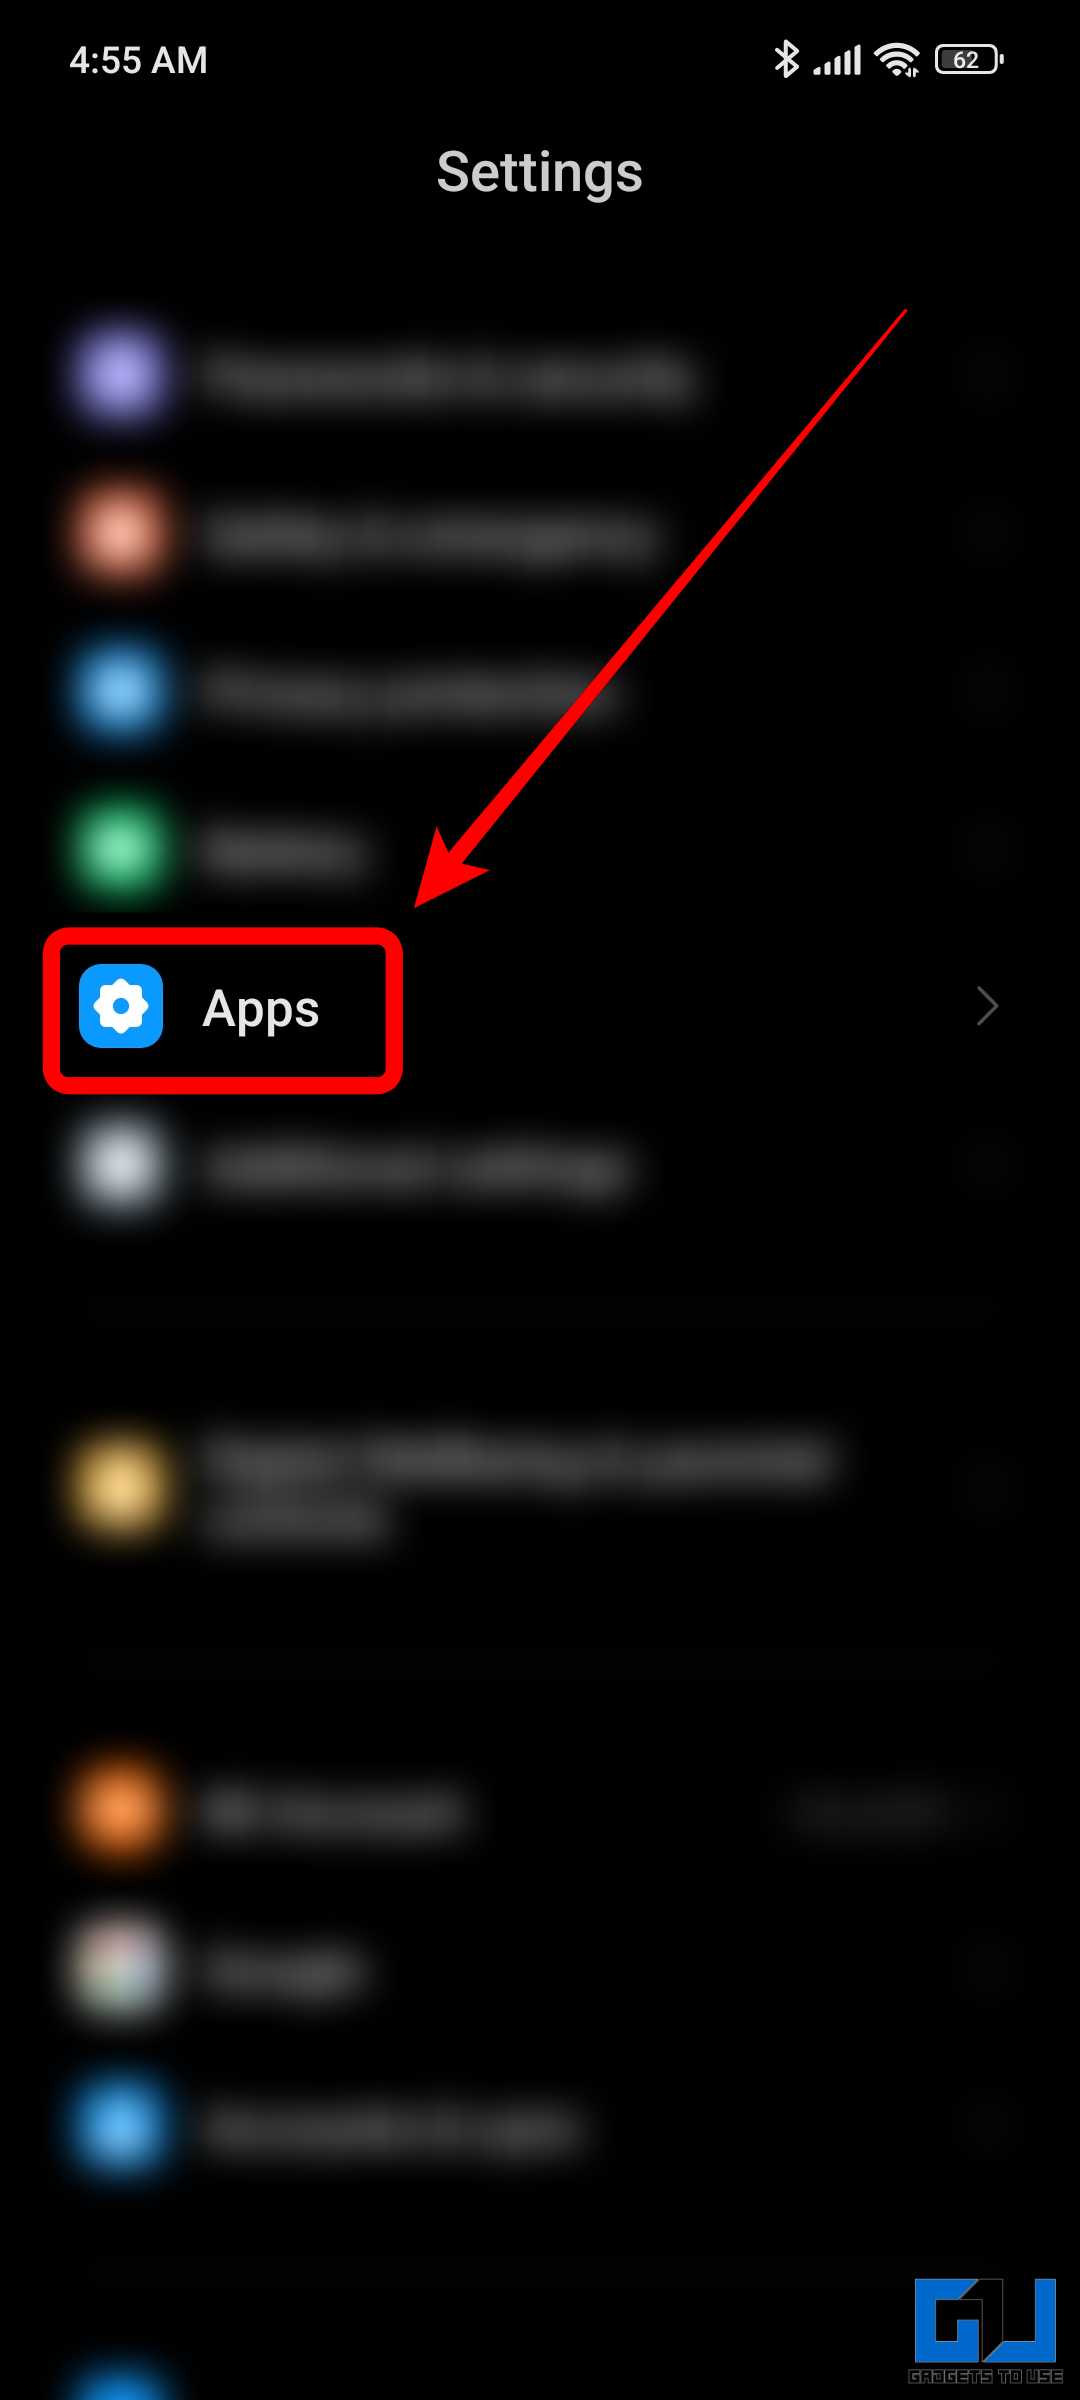 Go to Apps from Android settings